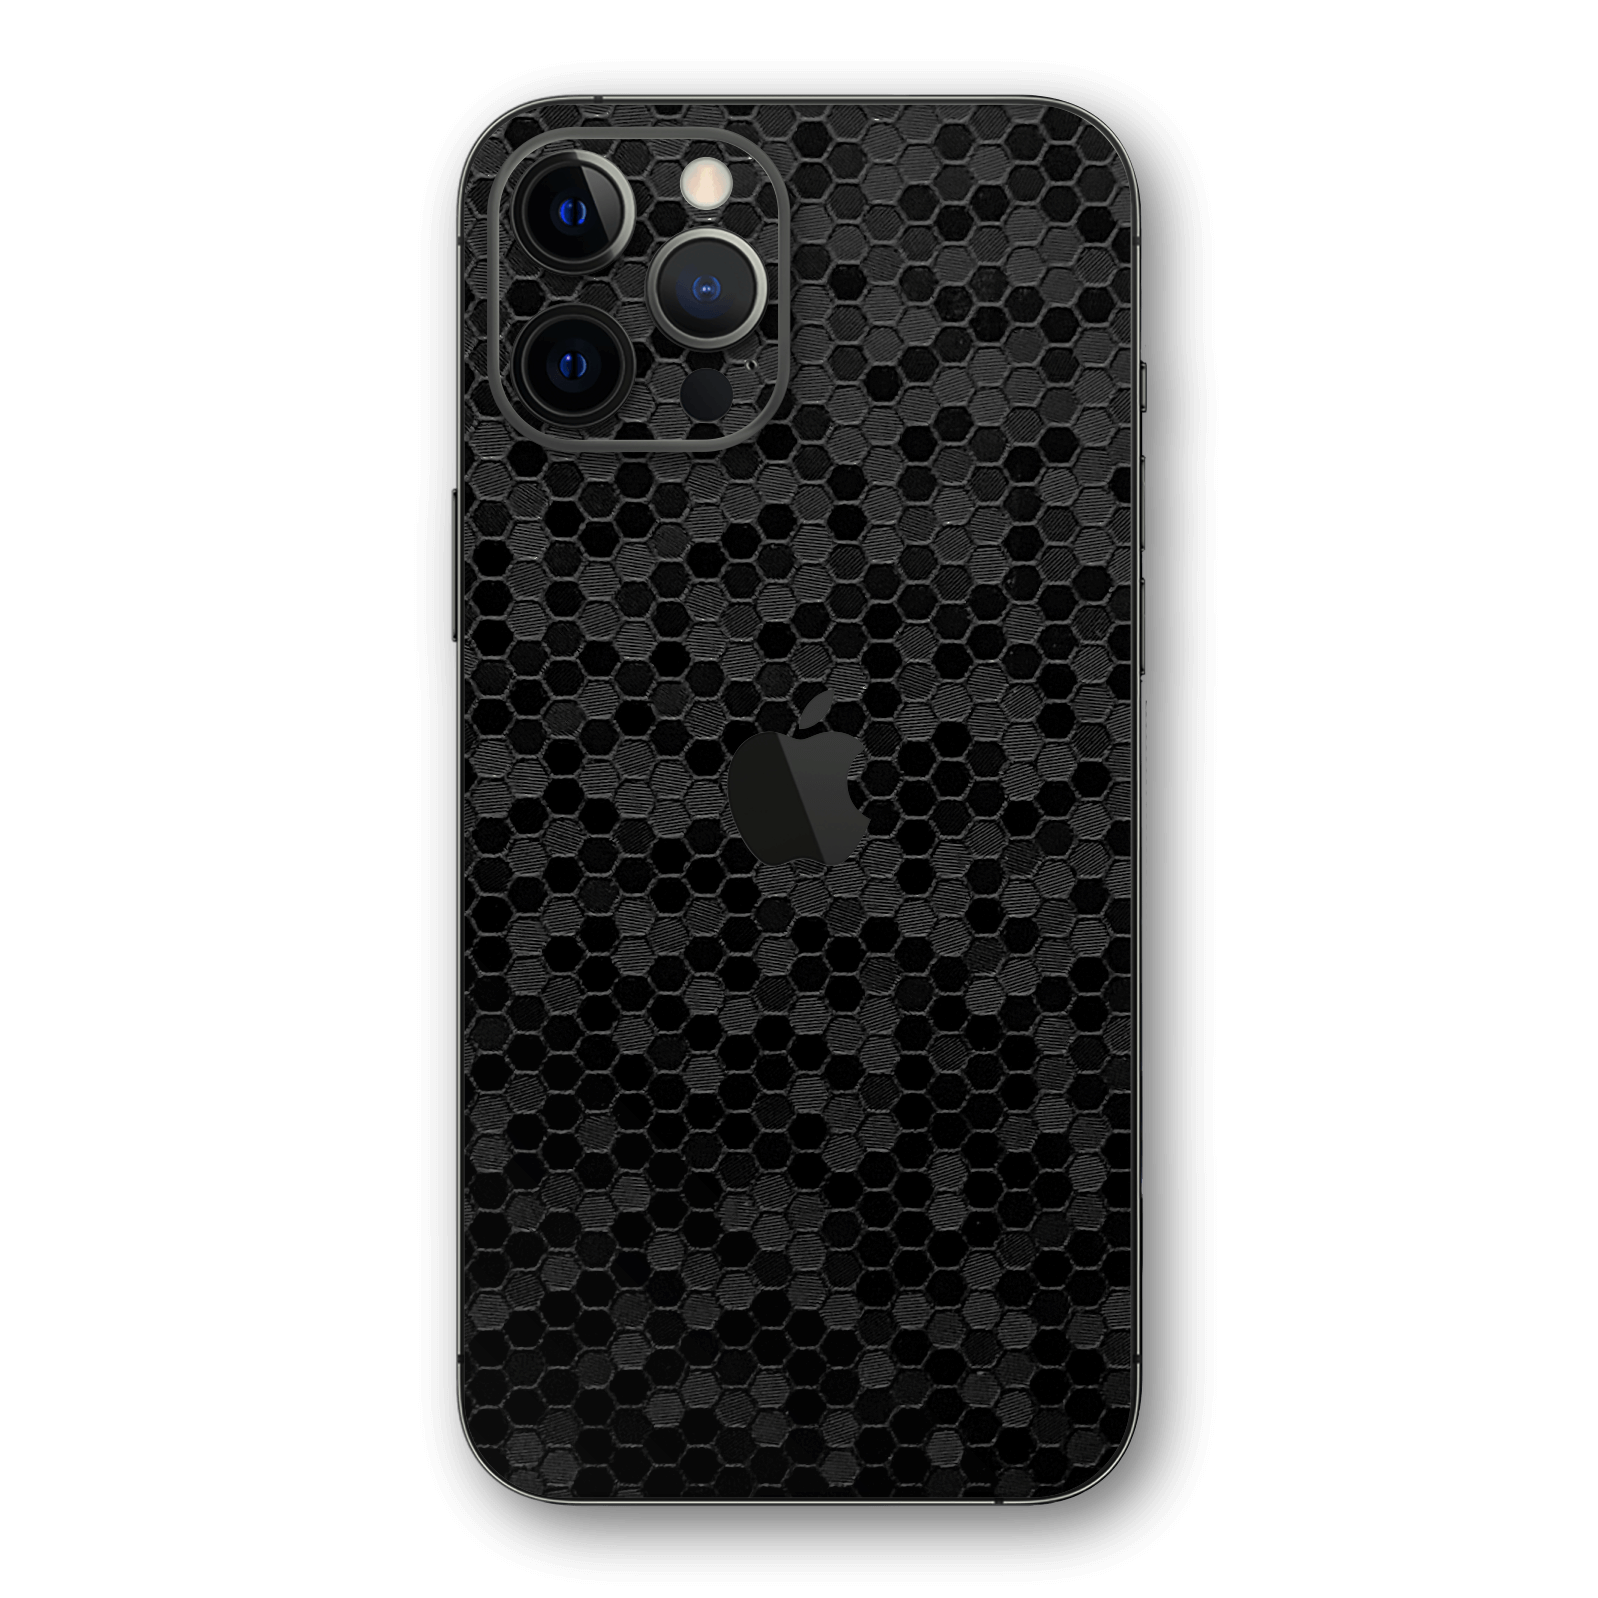 iPhone 12 Pro MAX LUXURIA BLACK HONEYCOMB 3D TEXTURED Skin - Premium Protective Skin Wrap Sticker Decal Cover by QSKINZ | Qskinz.com